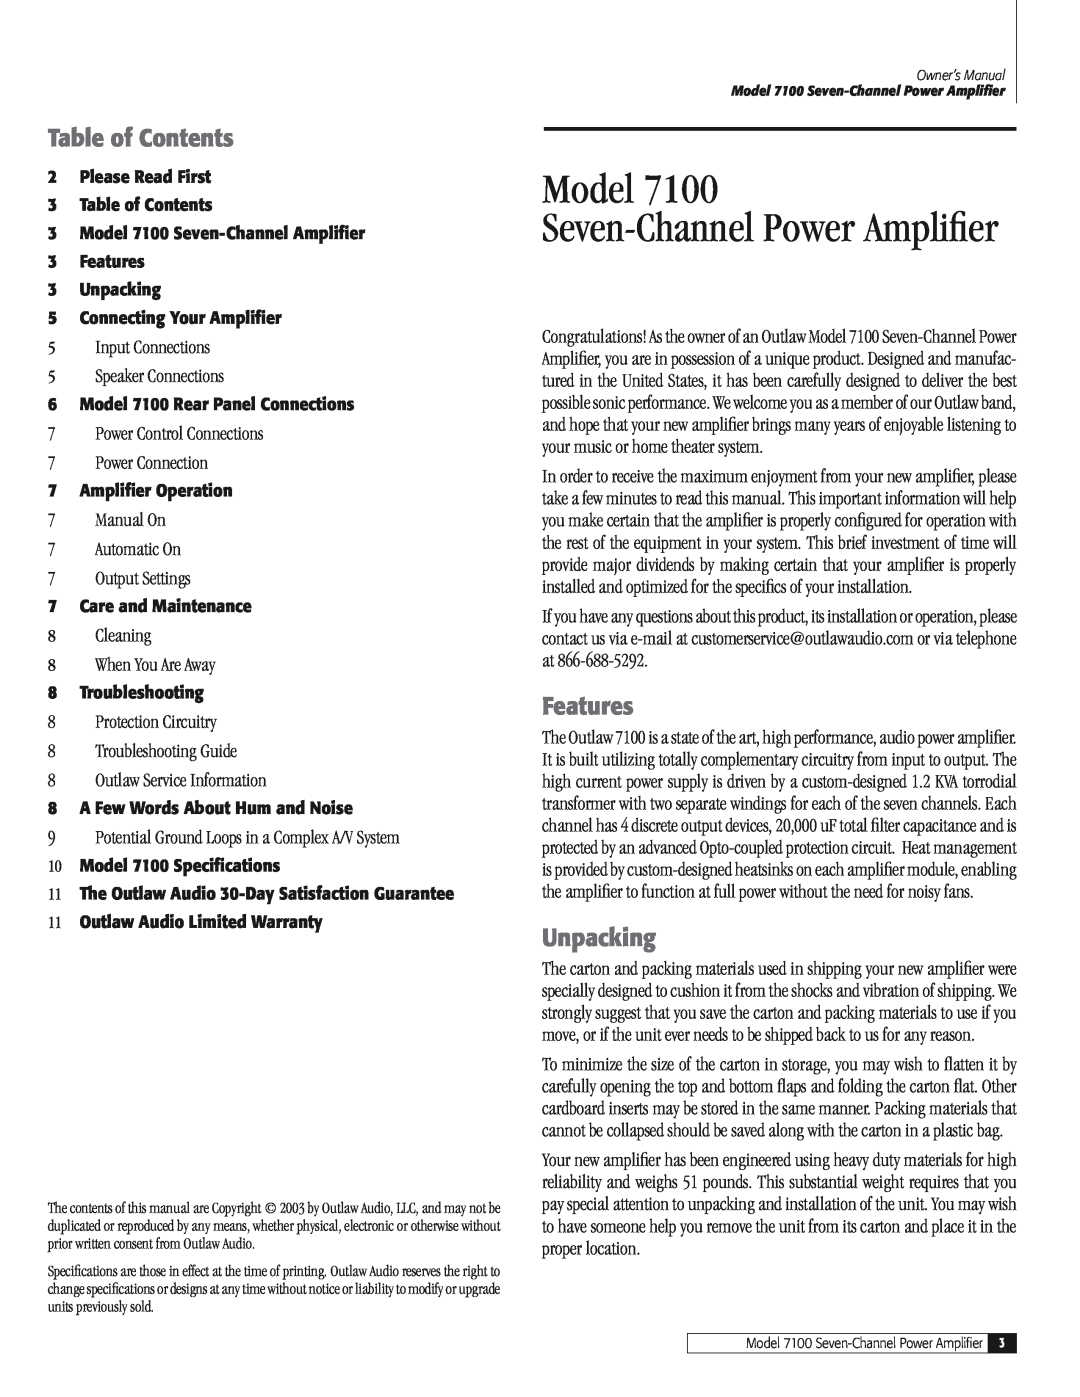 Outlaw Audio owner manual Table of Contents, Features, Unpacking, Model 7100 Seven-ChannelPower Amplifier 